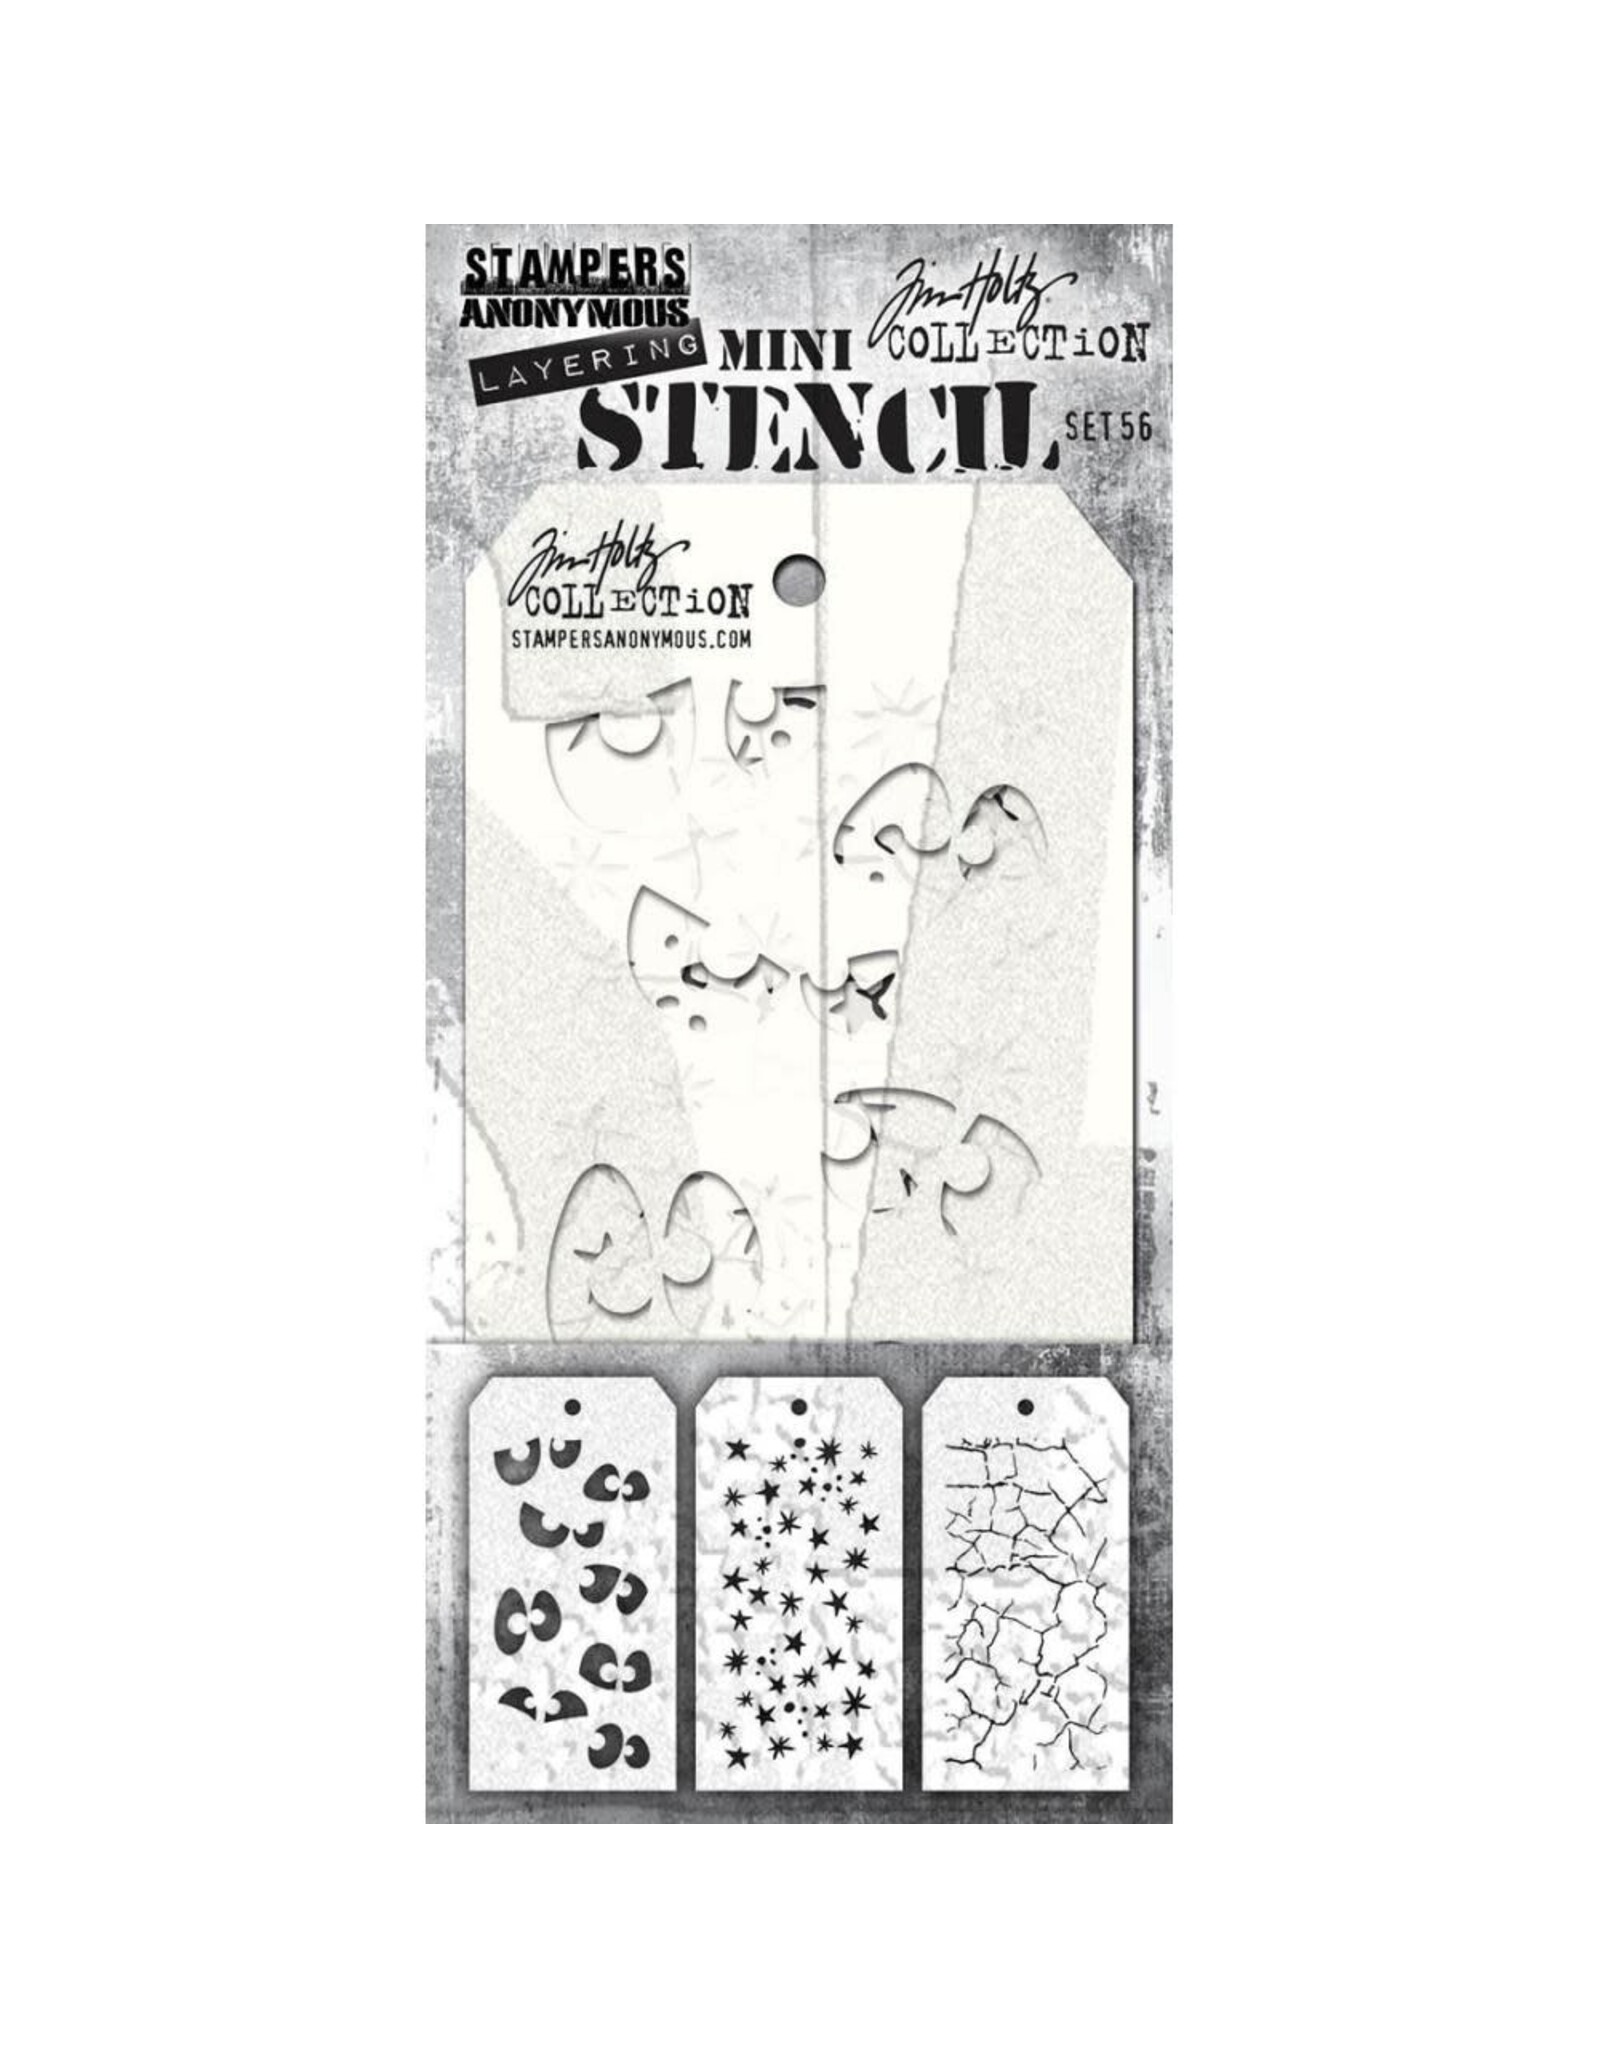 STAMPERS ANONYMOUS STAMPERS ANONYMOUS TIM HOLTZ MINI LAYERING STENCIL SET #56 3PK